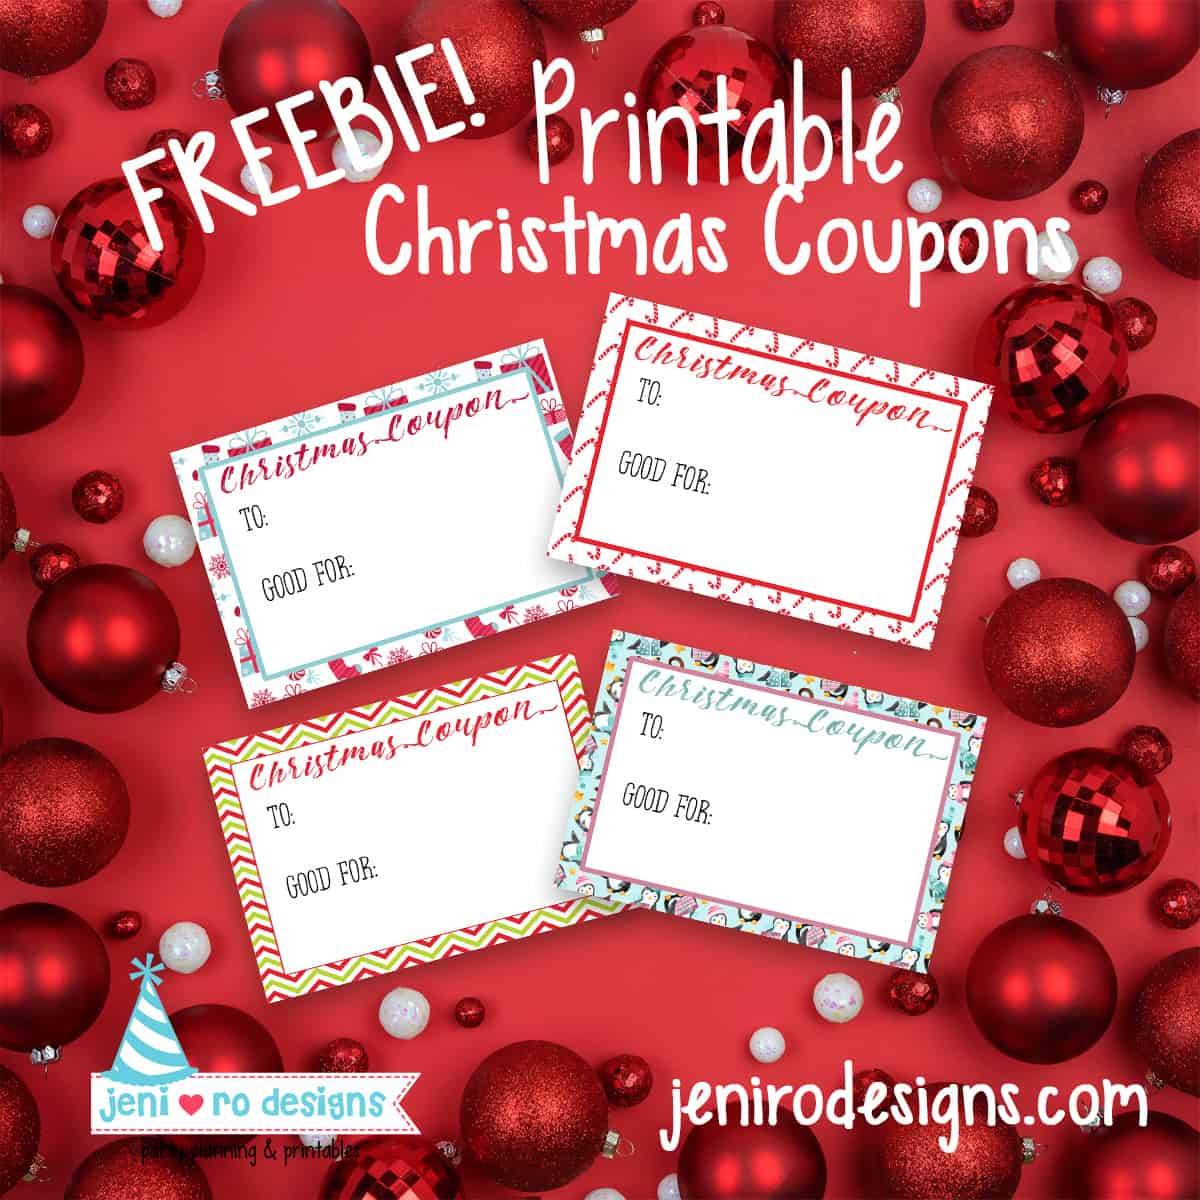 Christmas coupon printable new in the FREE printable library